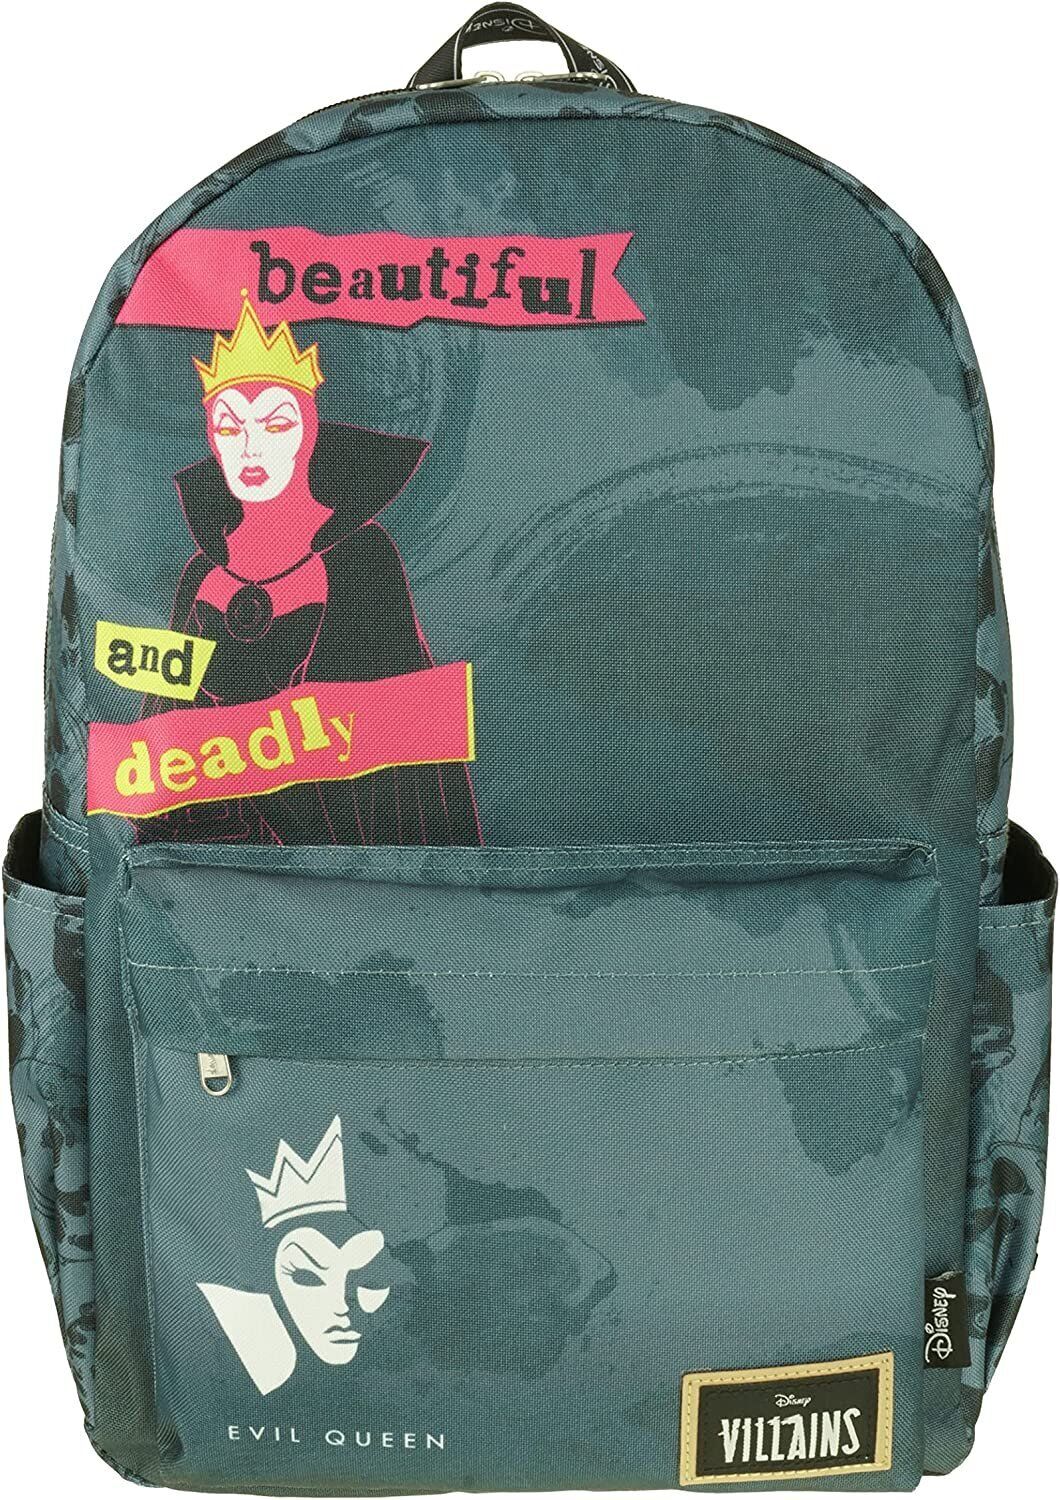 Classic Disney Villains Backpack with Laptop Compartment for School, Travel,...